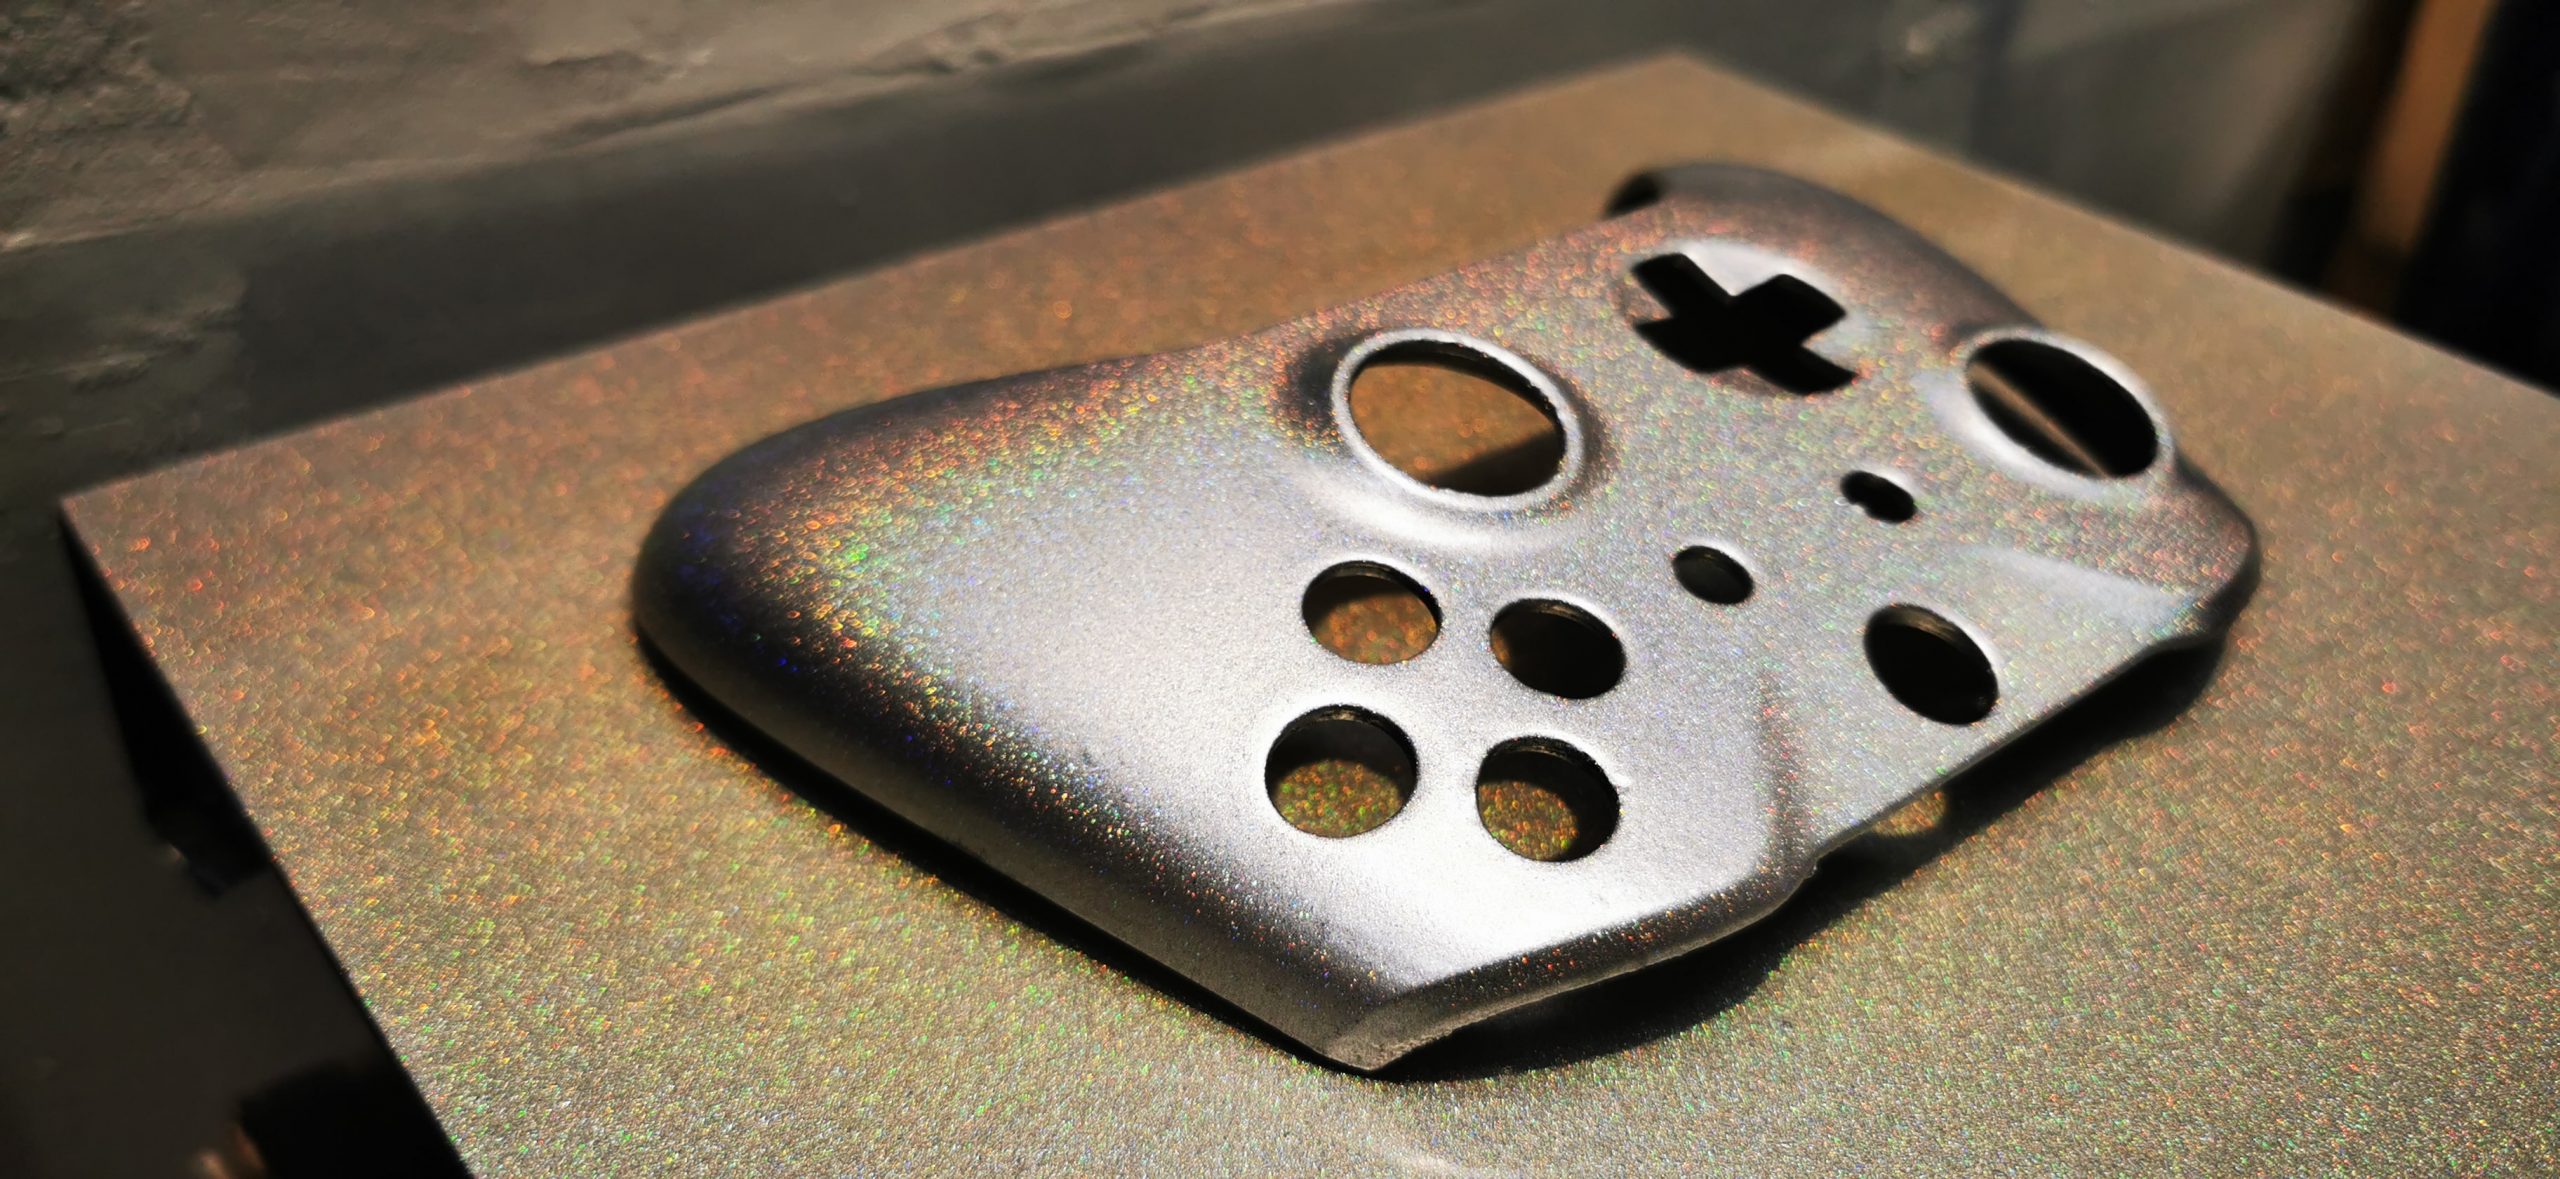 shell of painted controller